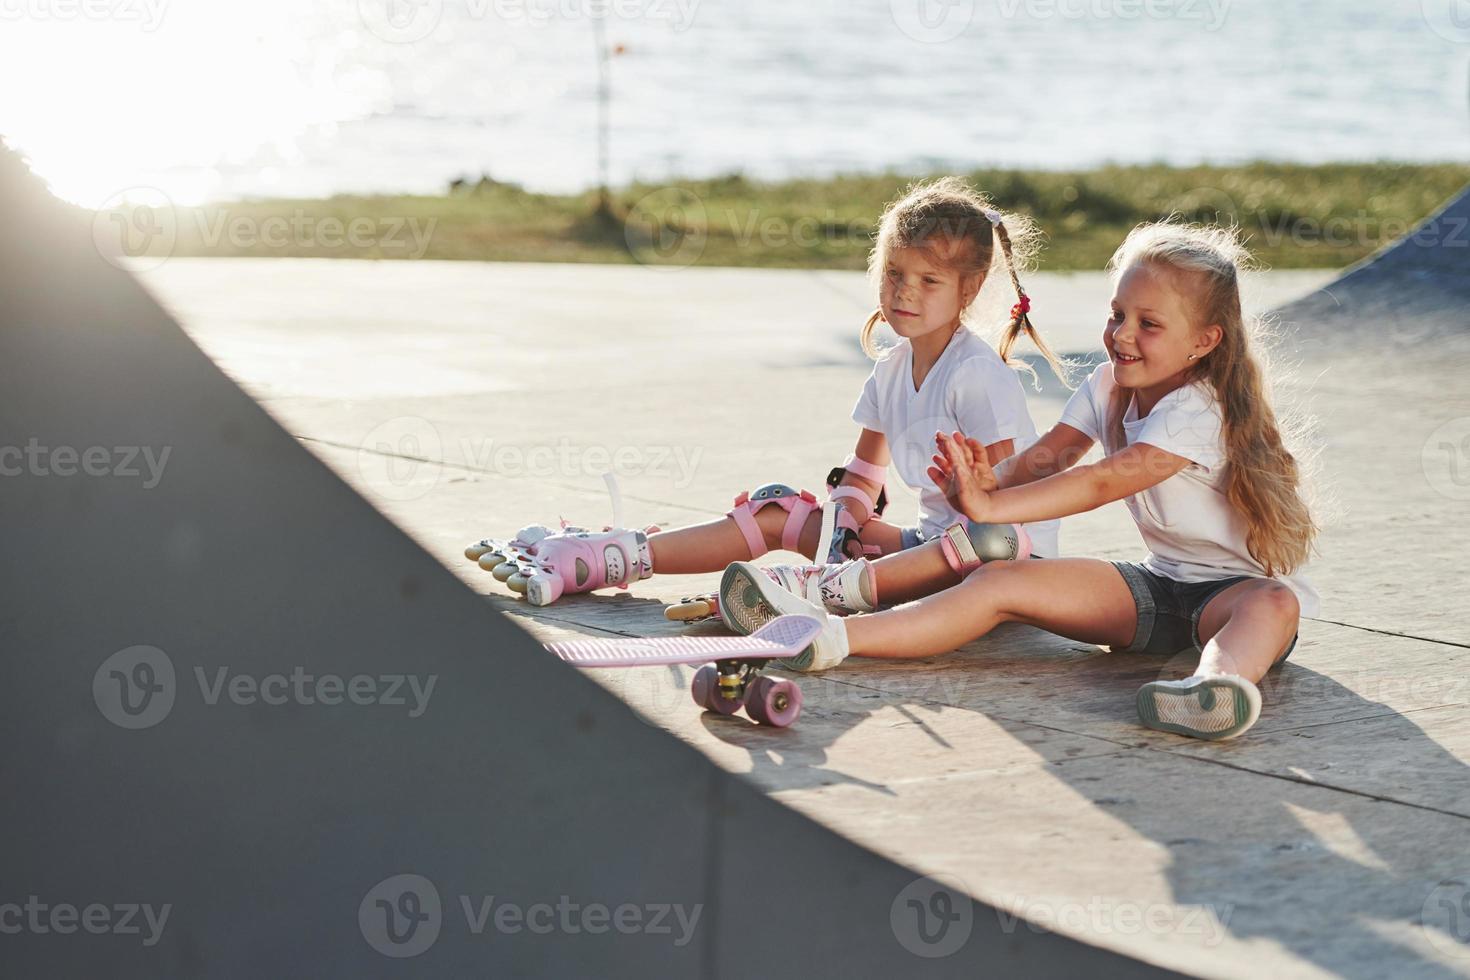 Relaxing and have conversation. On the ramp for extreme sports. Two little girls with roller skates outdoors have fun photo